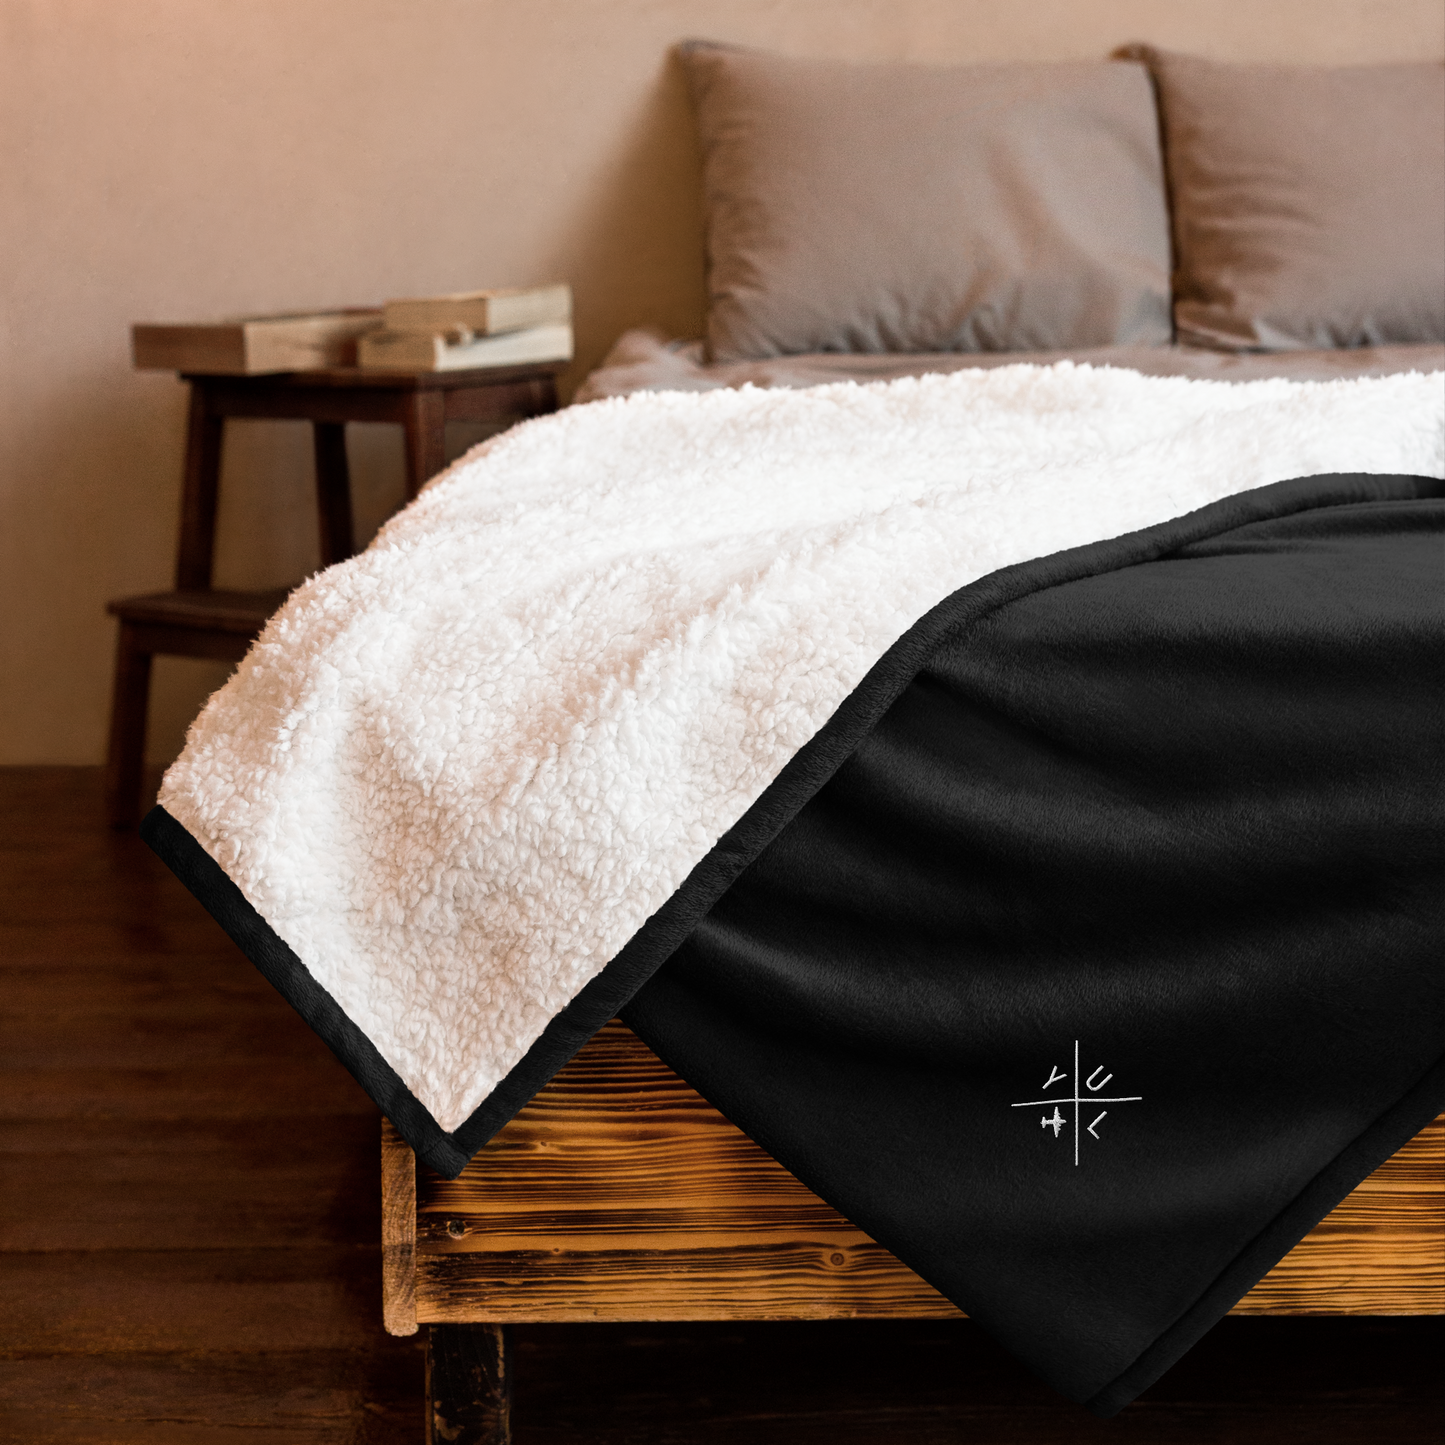 YHM Designs - YUL Montreal Premium Sherpa Blanket - Crossed-X Design with Airport Code and Vintage Propliner - White Embroidery - Image 05